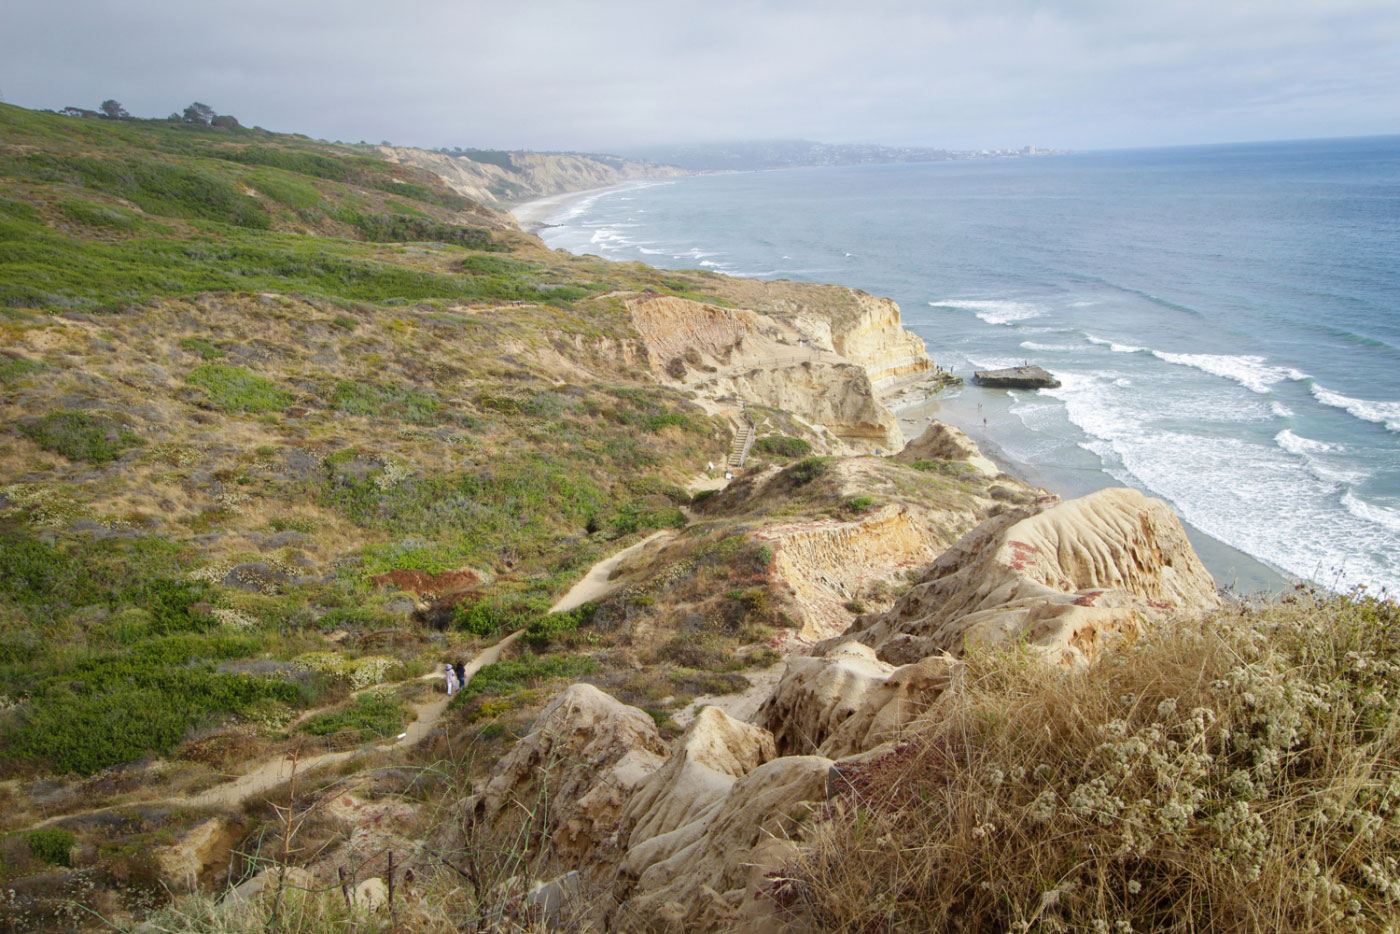 Hike Razor Point and Beach Trail Loop in Torrey Pines State Natural Reserve, California - Stav is Lost